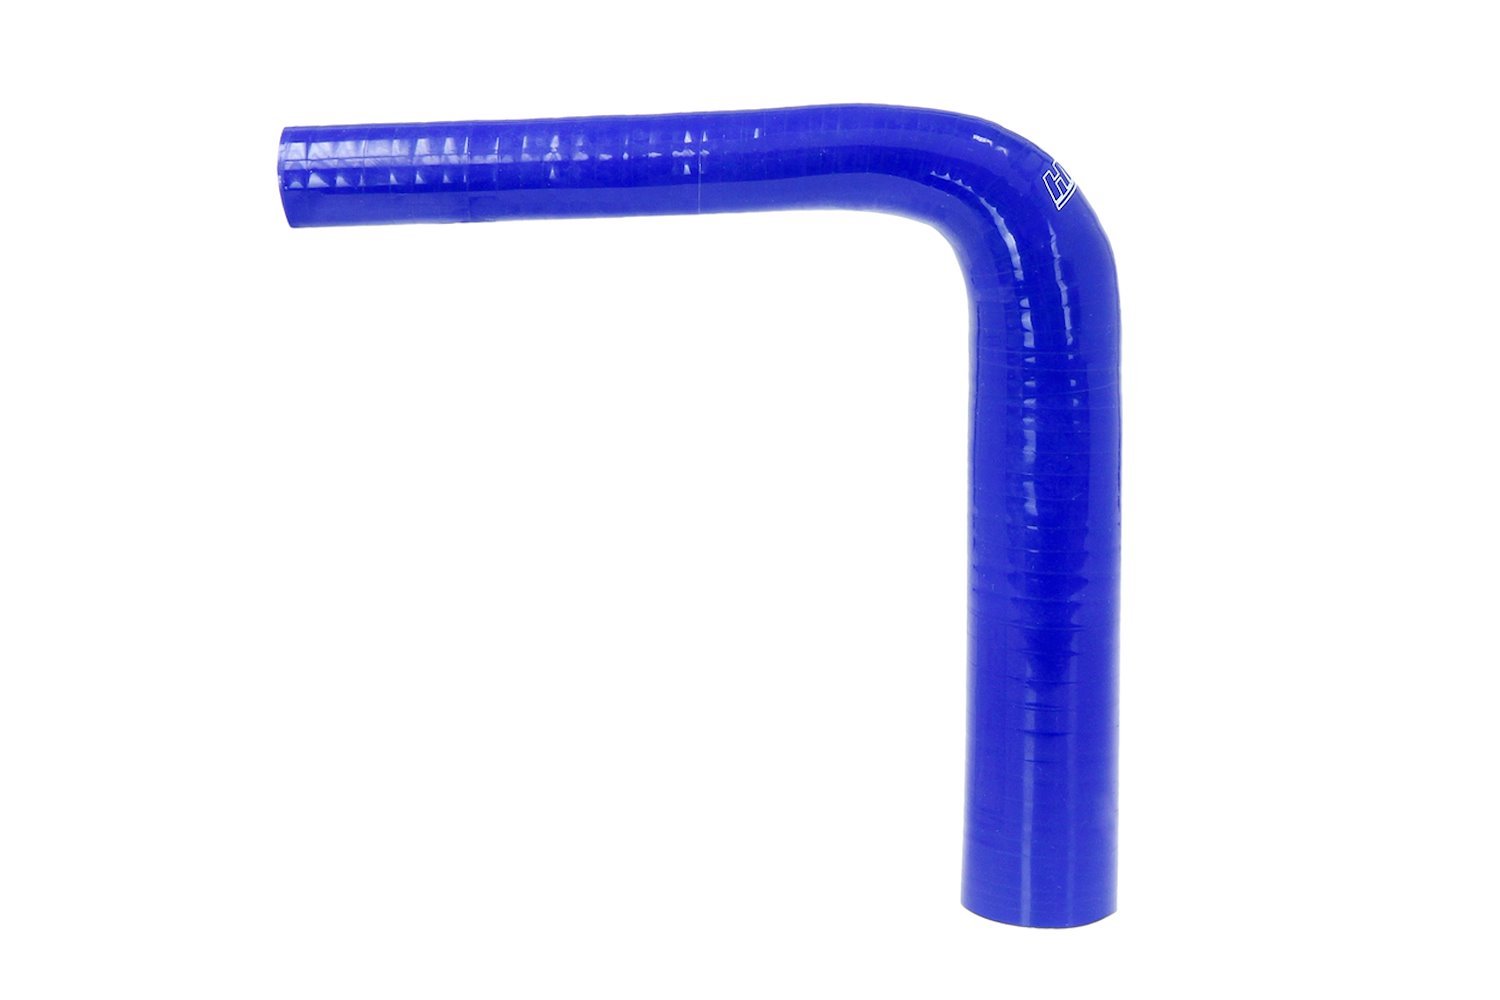 HTSER90-087-150-BLUE Silicone 90-Degree Elbow Hose, High-Temp 4-Ply Reinforced, 7/8 in. - 1-1/2 in. ID, Blue